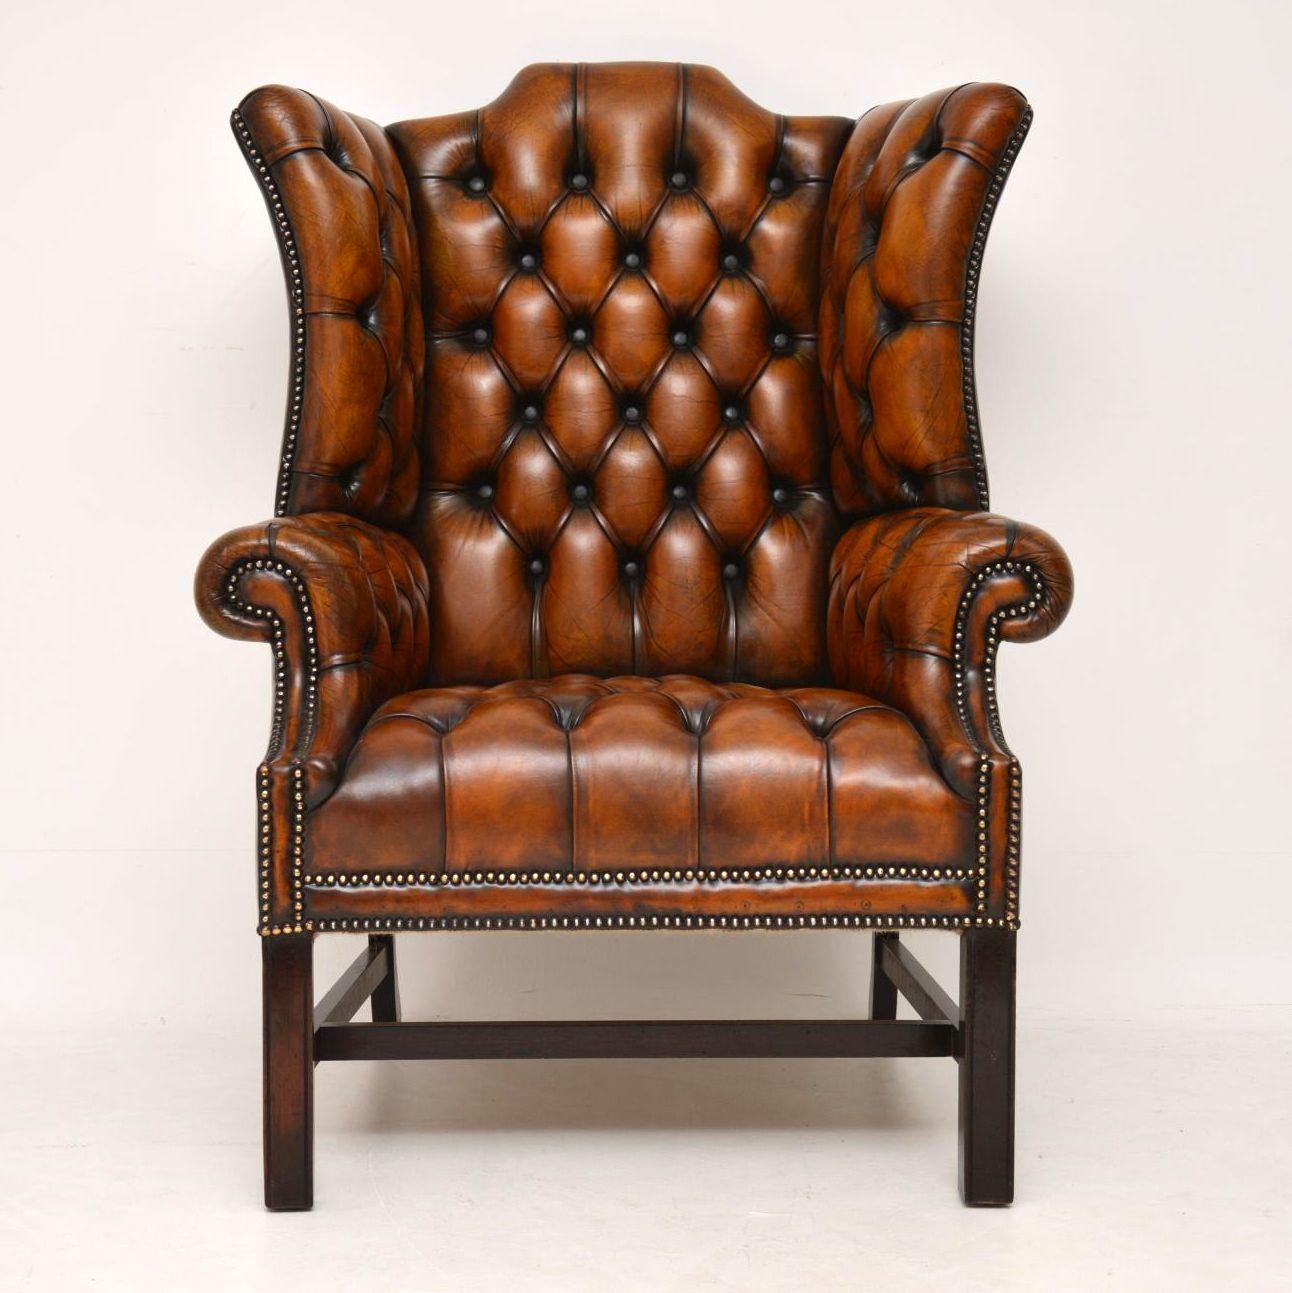 Large antique deep buttoned leather wing armchair in great condition, with loads of character and a lovely original color. This chair is very comfortable, with good back and head support. It has a high hump back, with deep shaped out wings, deep